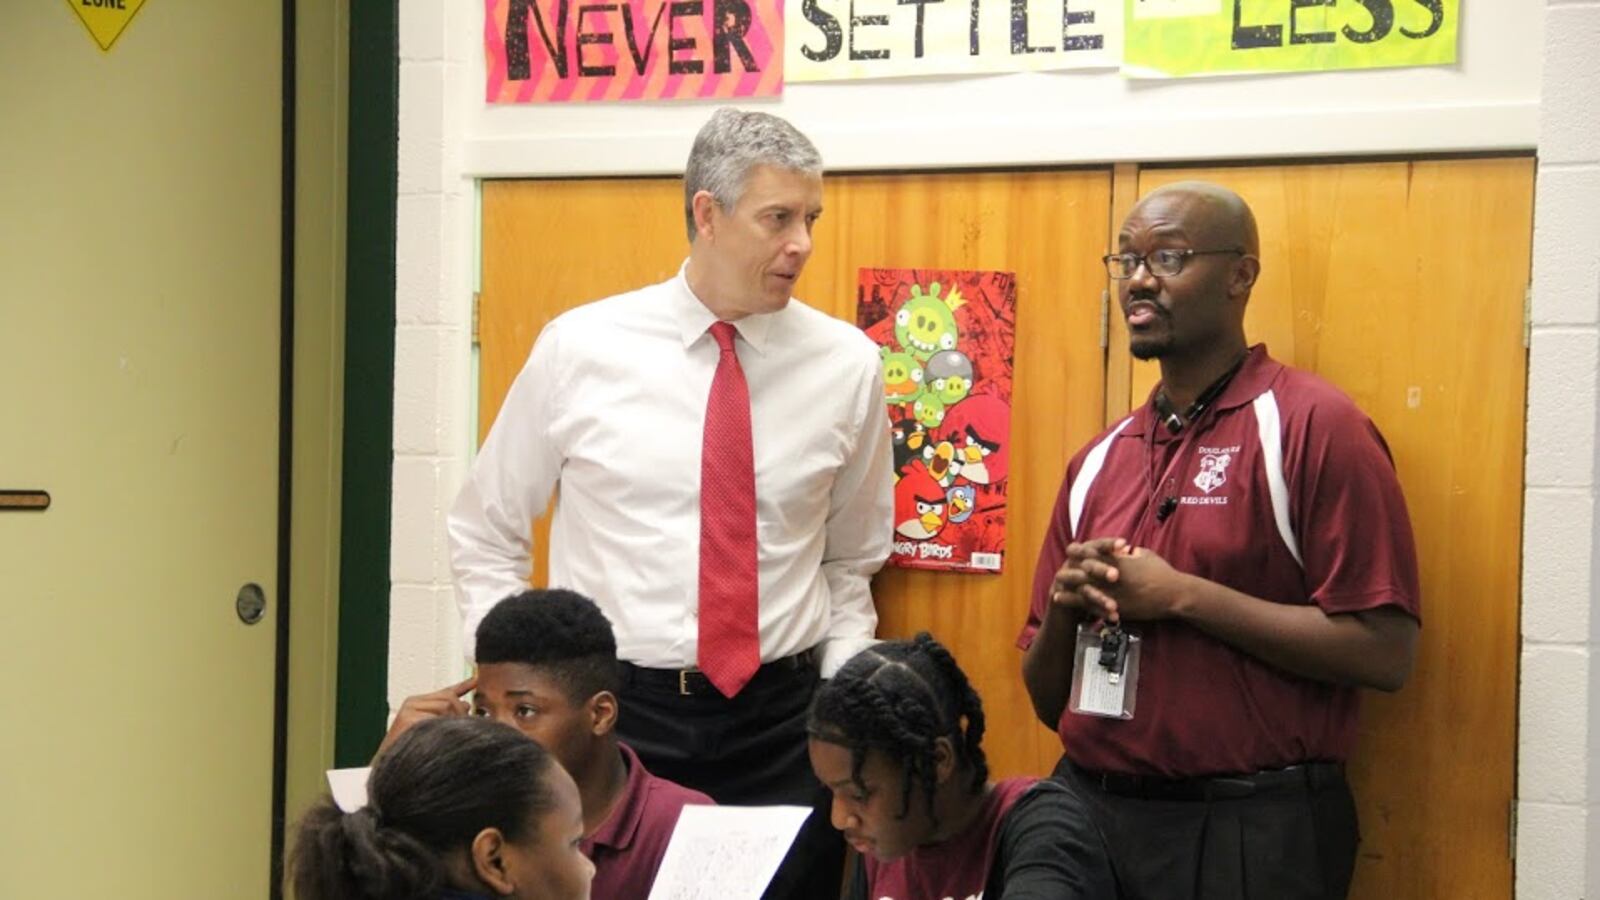 Outgoing U.S. Education chief Arne Duncan visits Memphis in October. Tennessee has overhauled much of its public education system to align with Duncan's agenda related to academic standards, accountability and improvement of struggling schools.